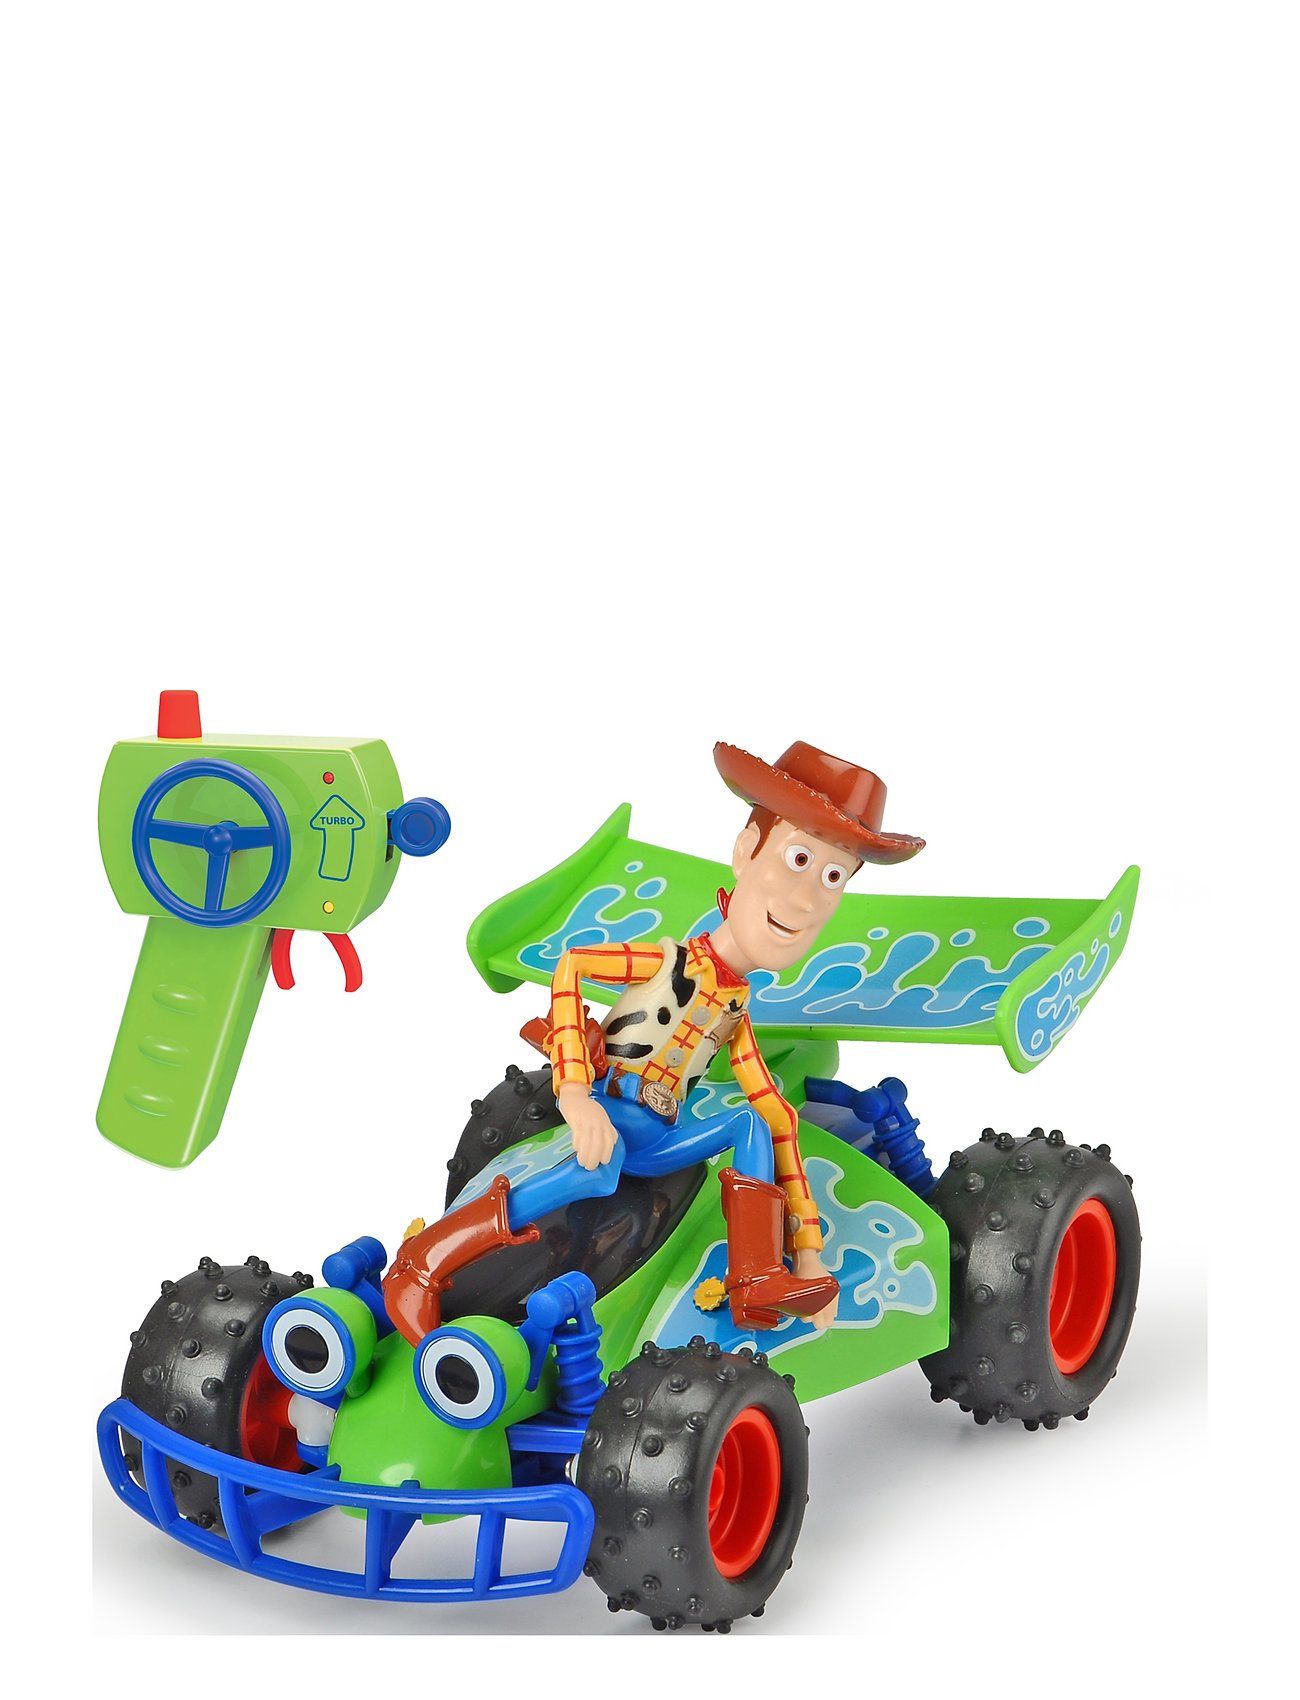 "Rc Toy Story Buggy With Woody Toys Toy Cars & Vehicles Toy Cars Multi/patterned Jada Toys"